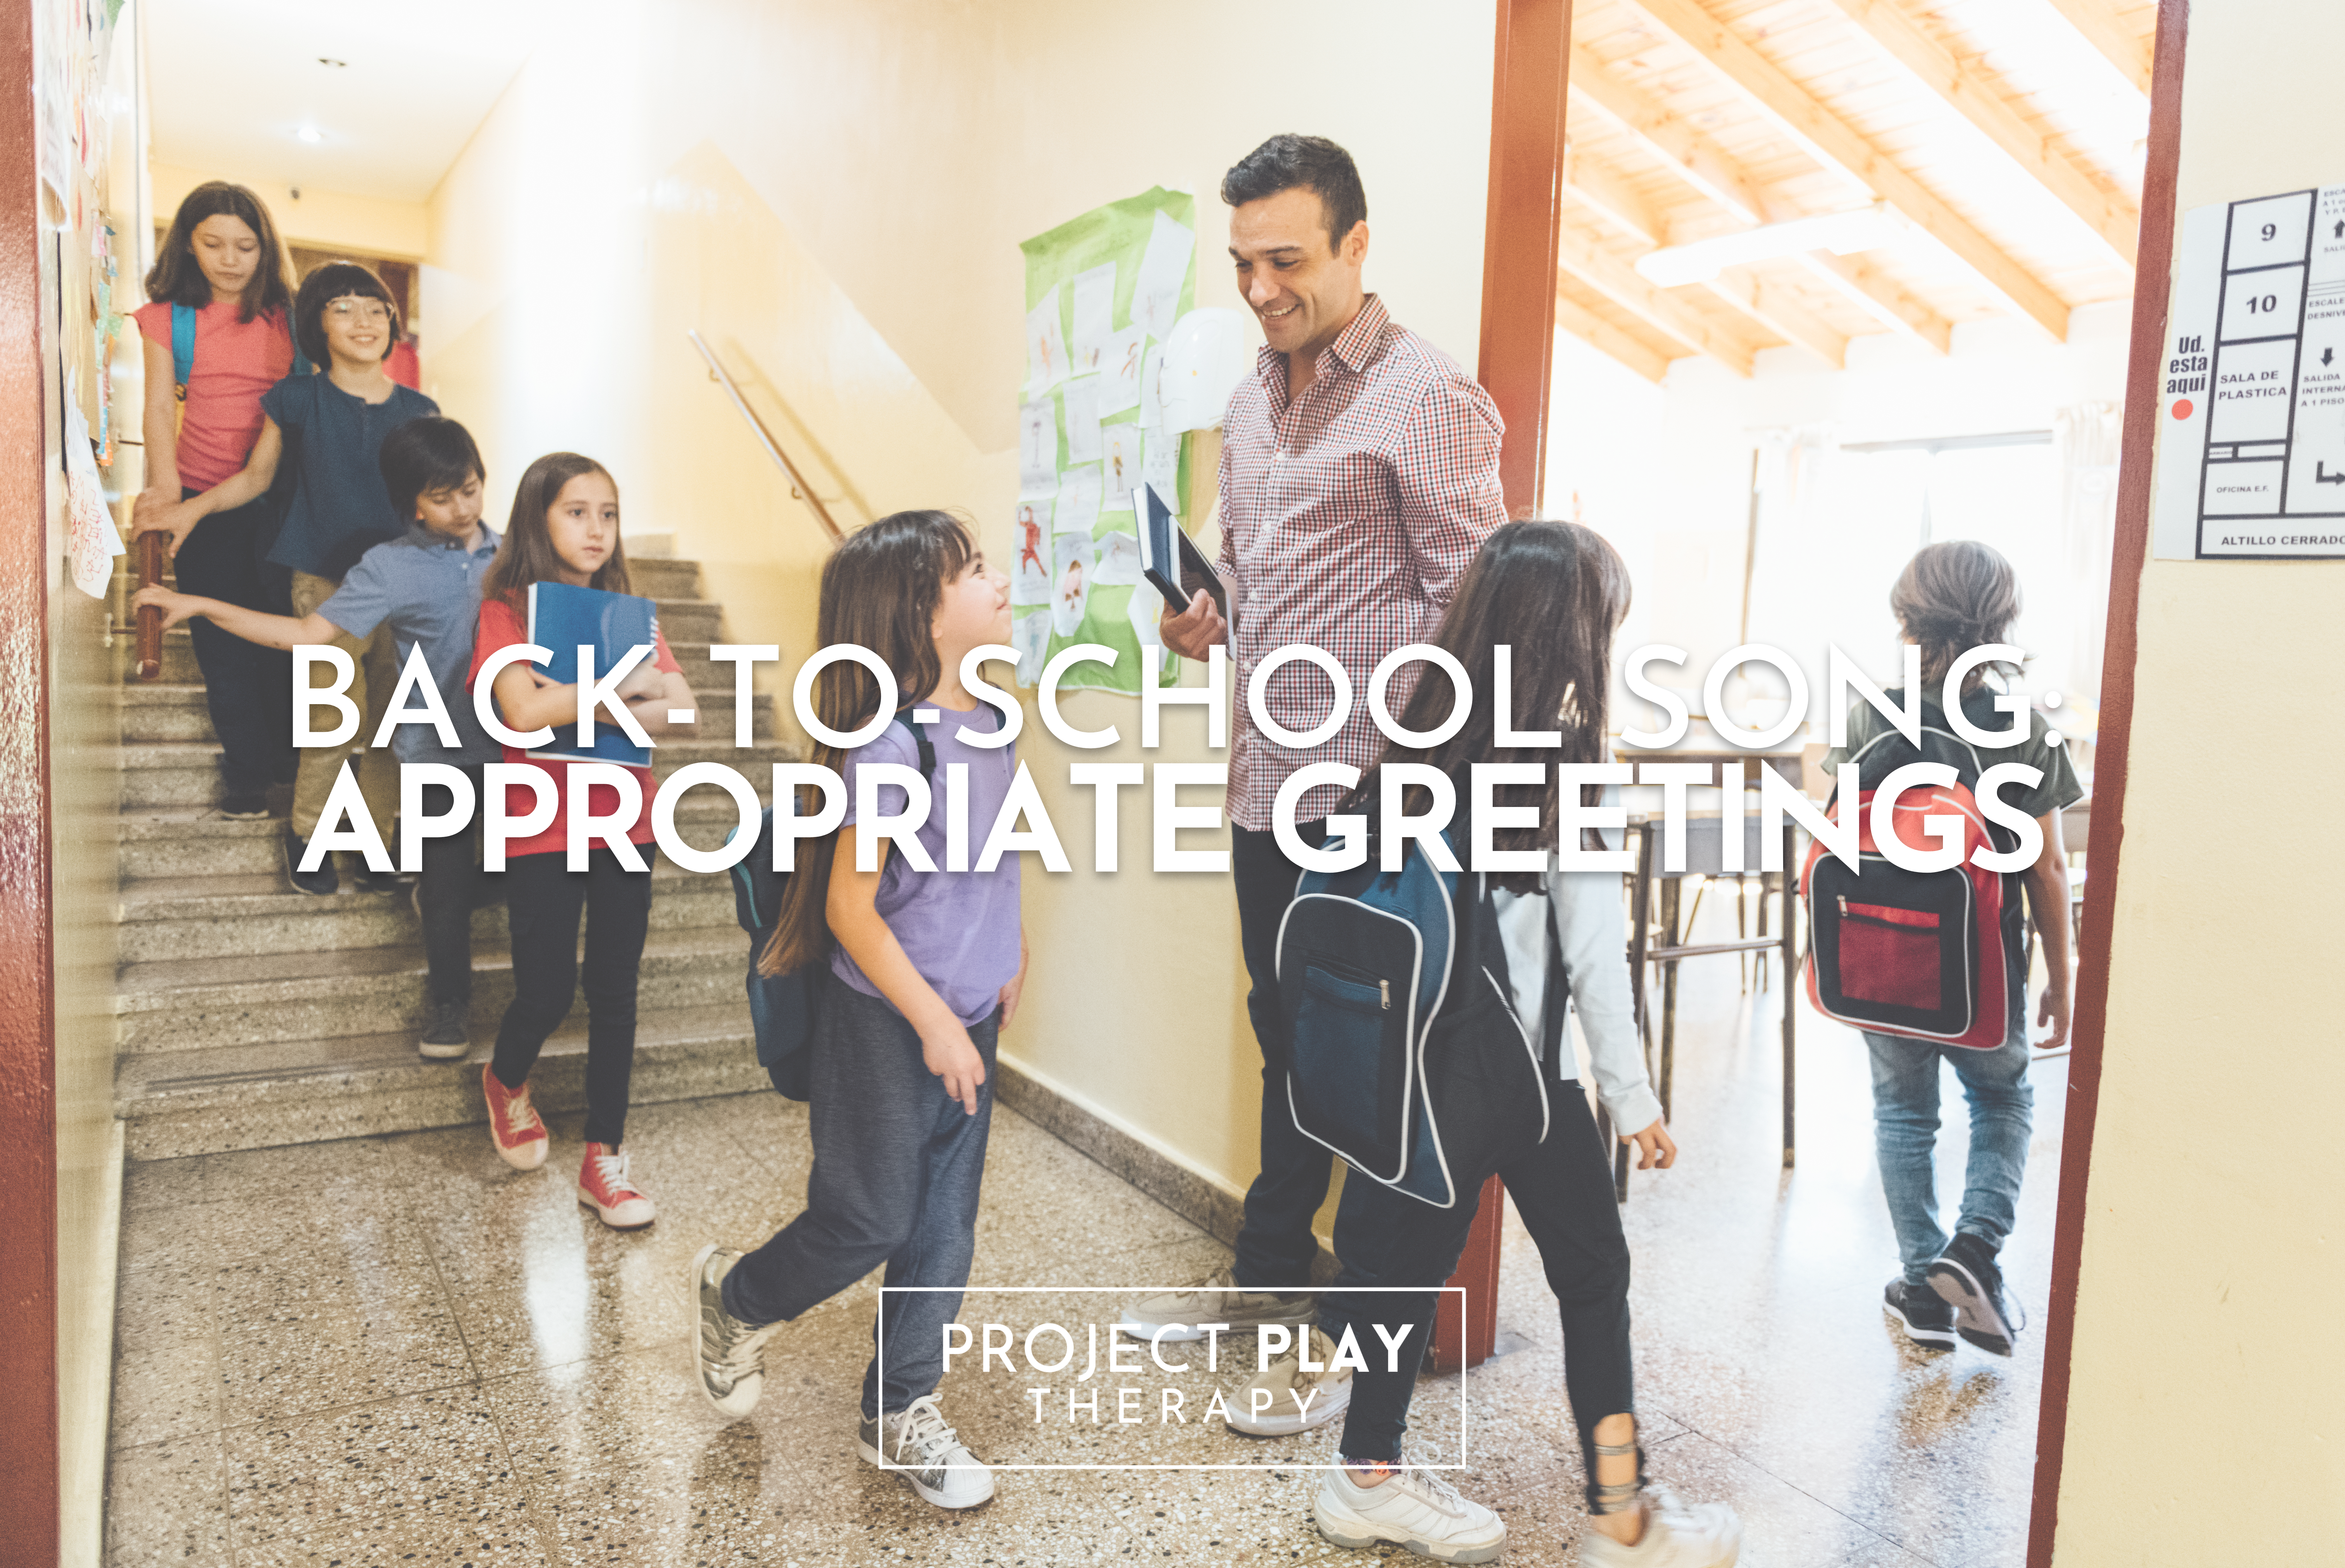 Back-to-School Song: Appropriate Greetings